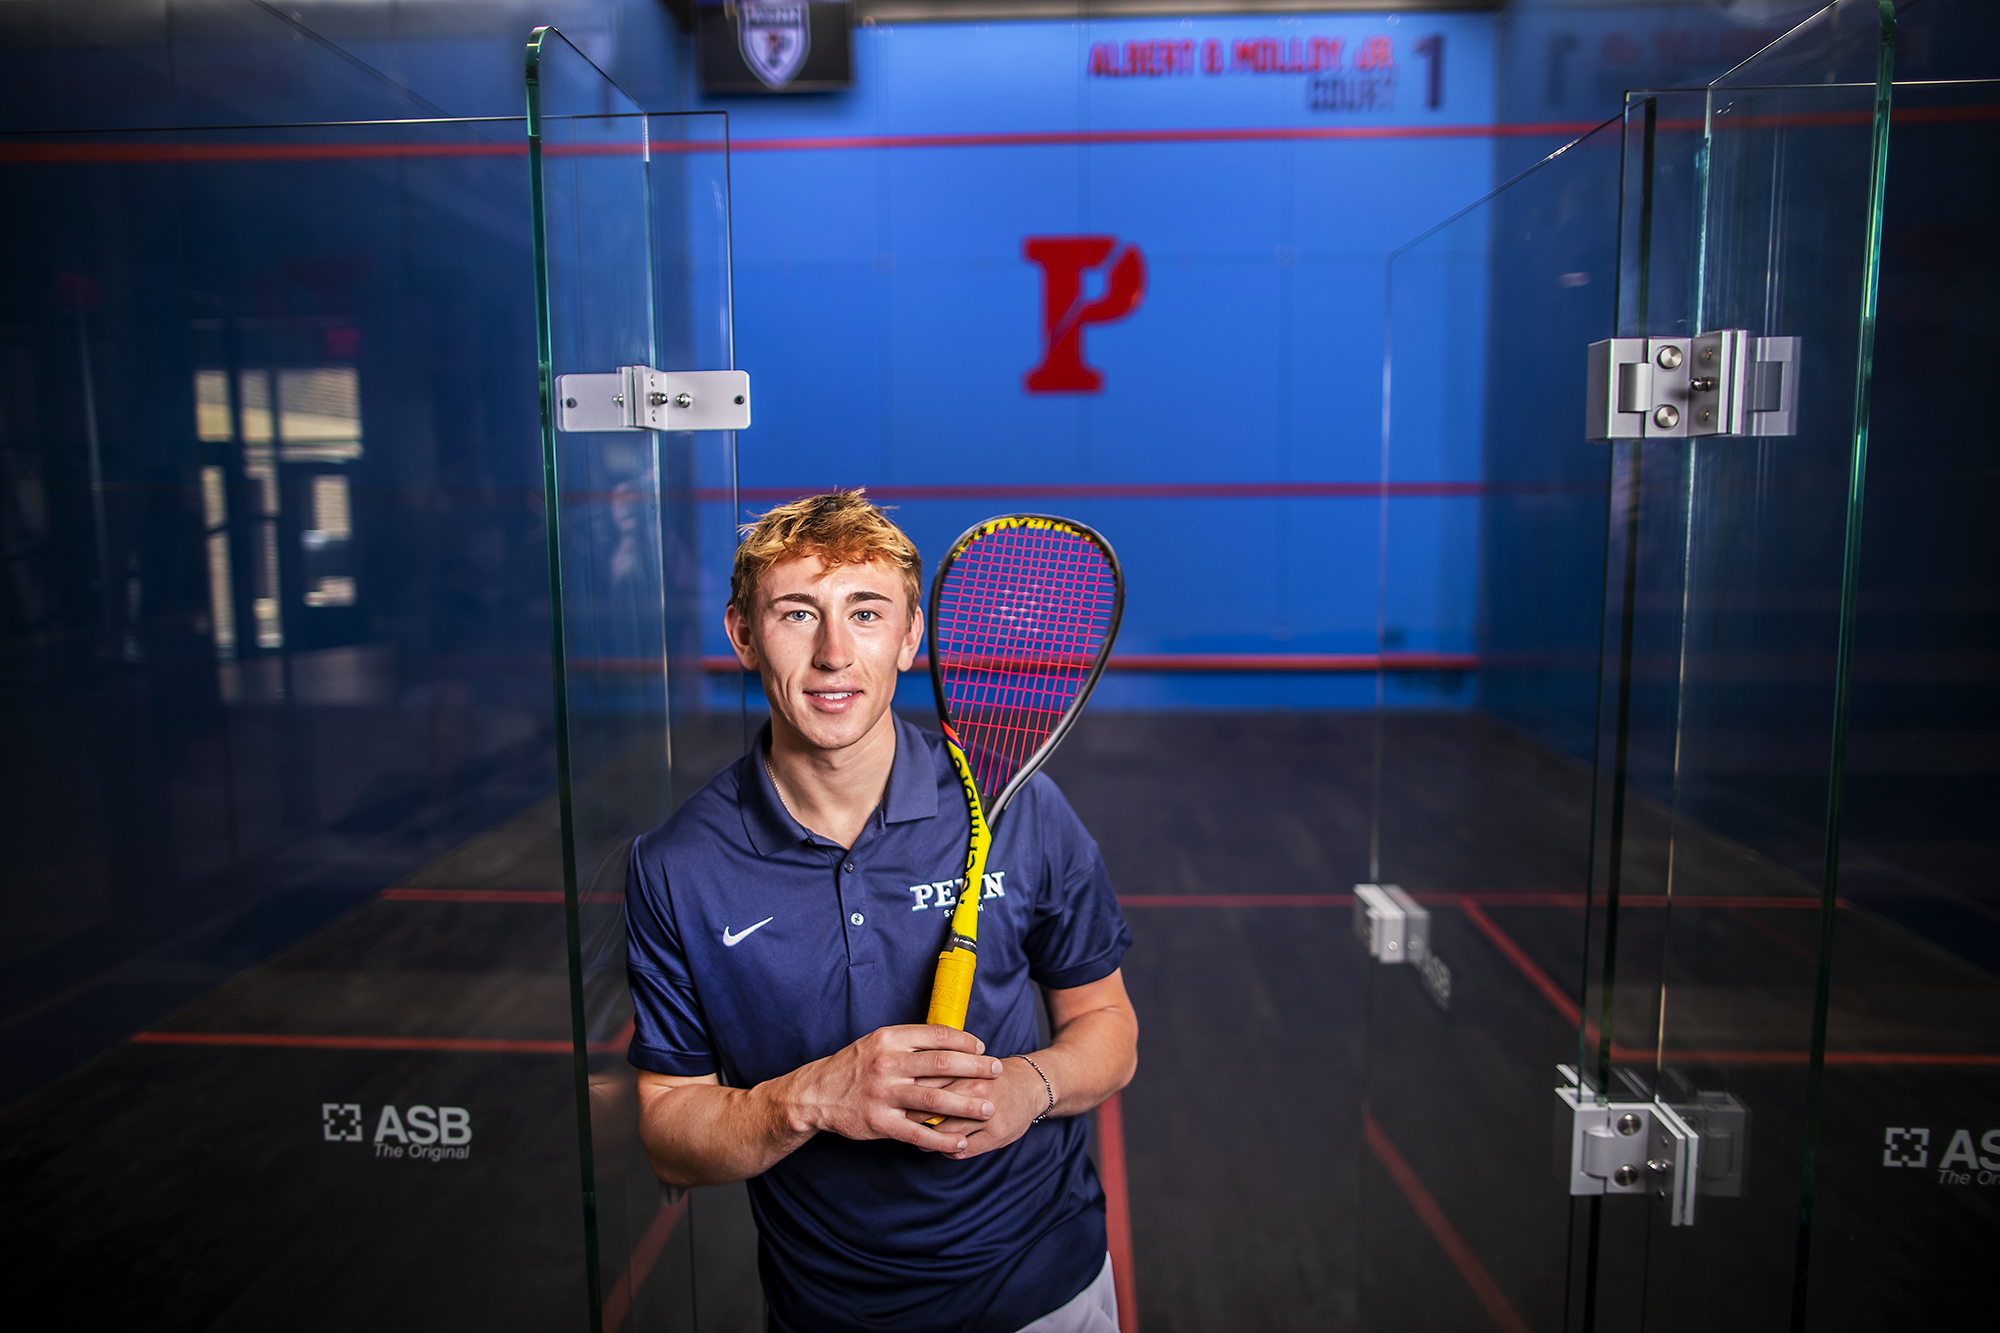 Andrew Douglas holds his racquet on his show in the Penn Squash Center.